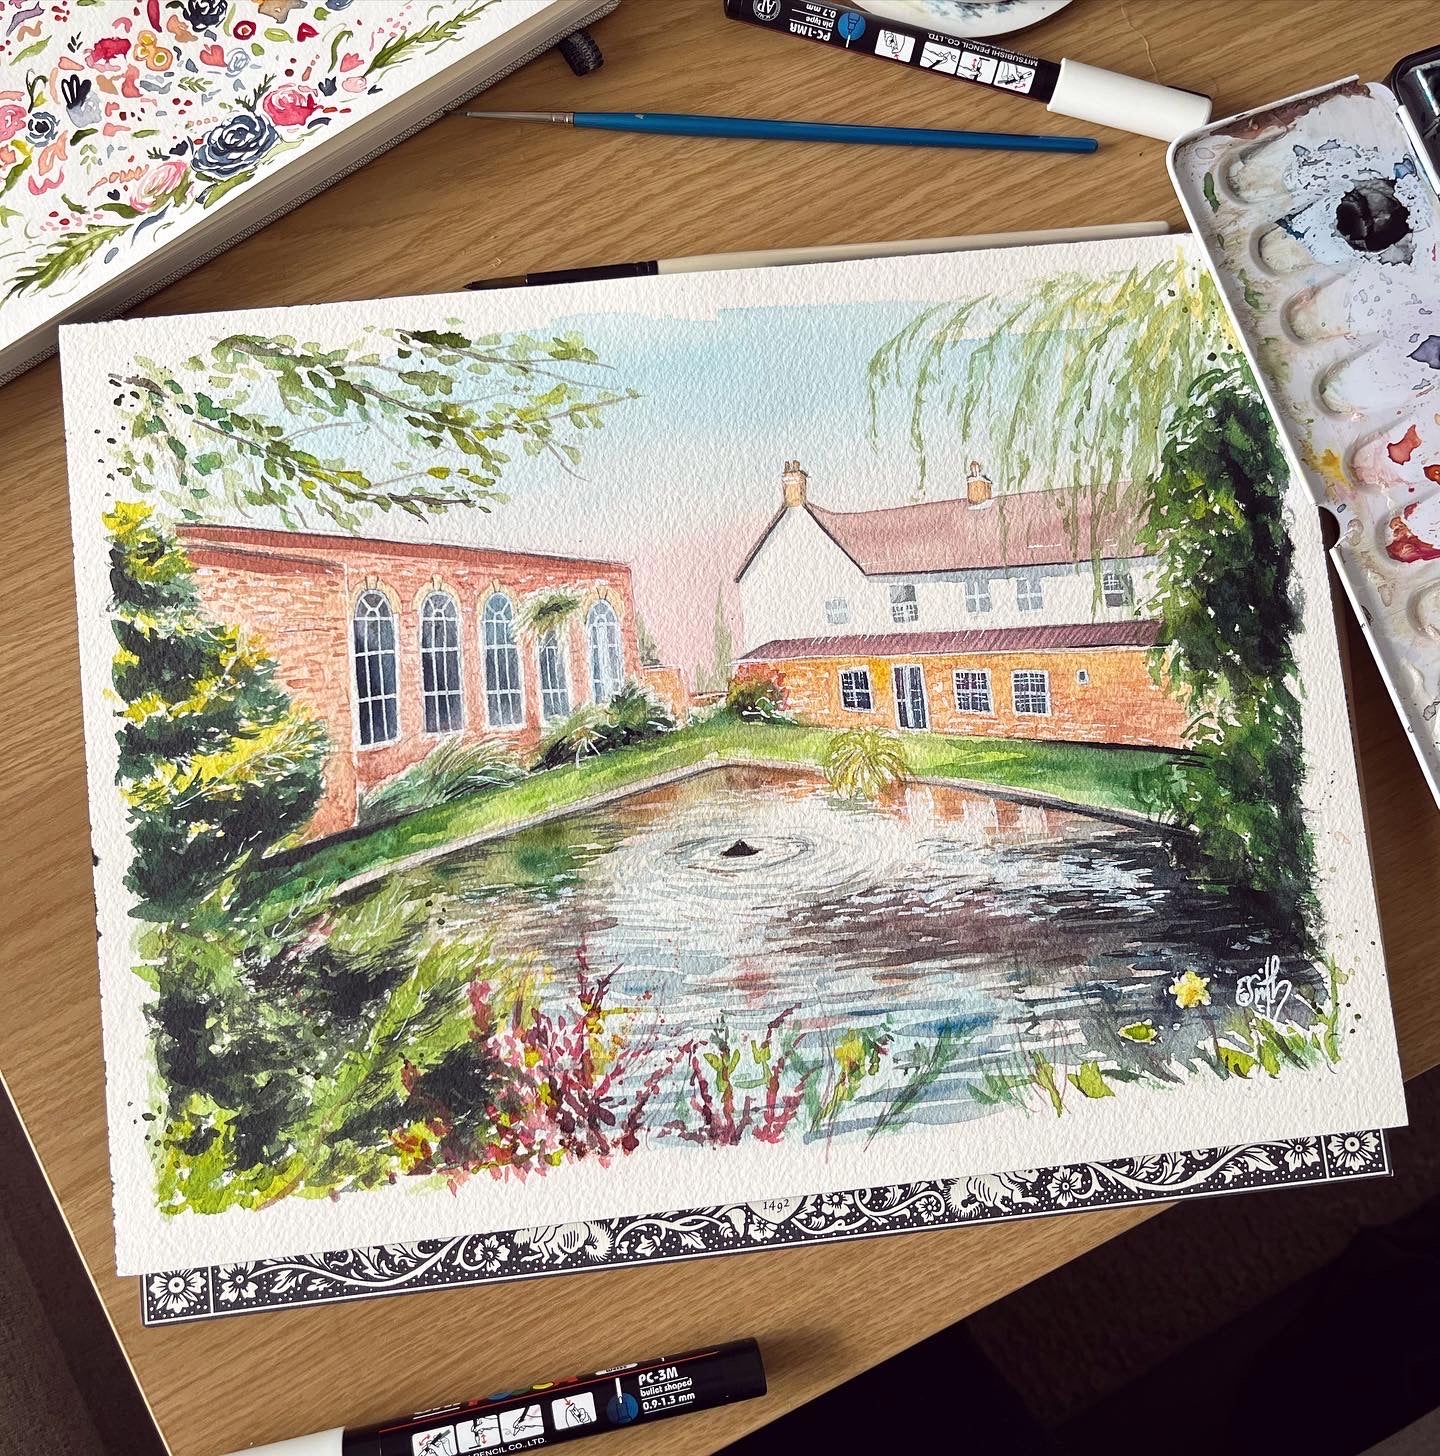 A bespoke watercolour venue illustration of the Stallingborough Grange, Grimsby, painted by local artist, Eve Leoni Smith for wedding invitations.